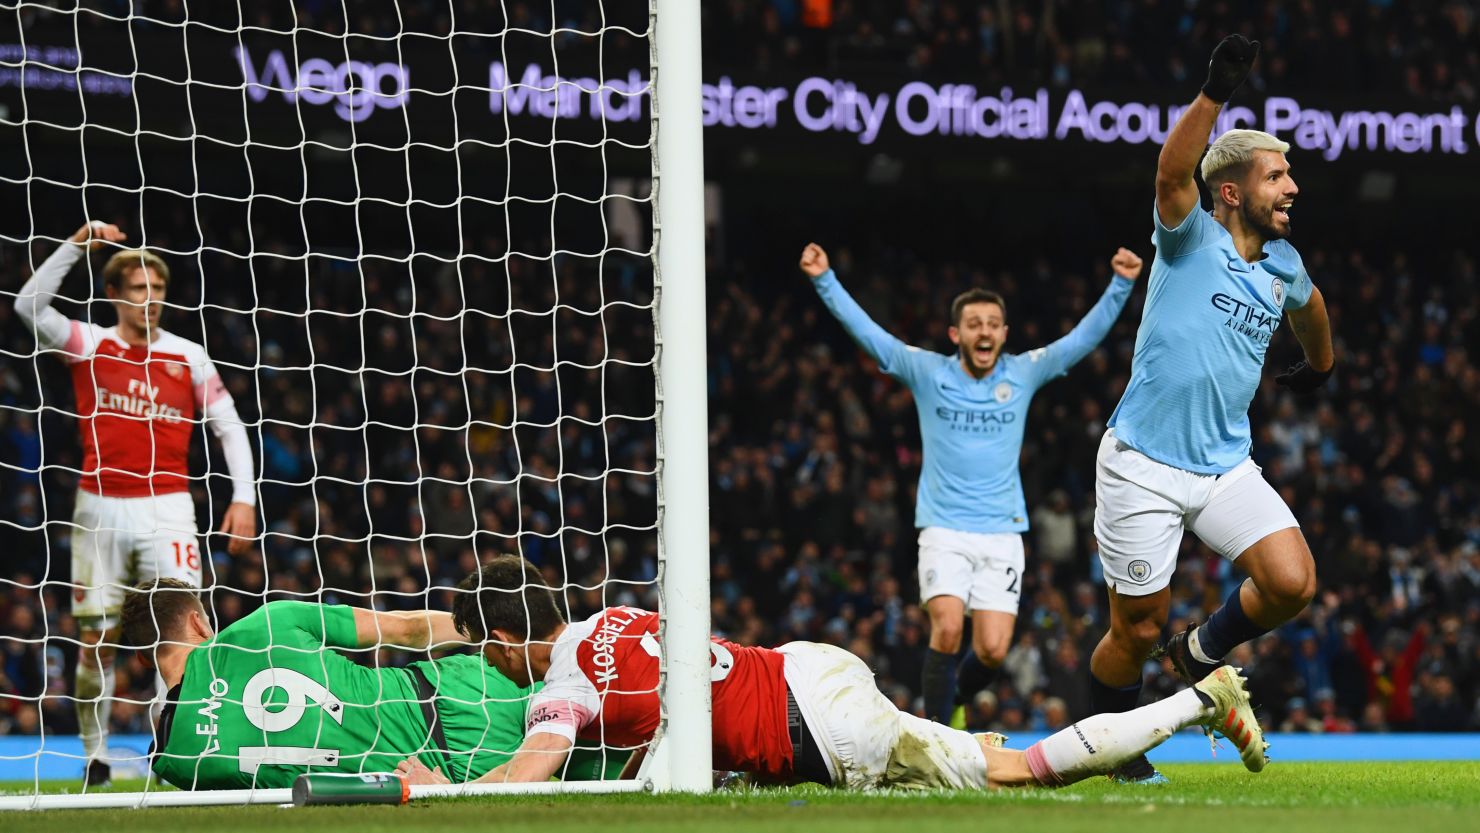 Sergio Aguero of Manchester City (right) celebrates after scoring his team's third goal during the Premier League match between Manchester City and Arsenal FC at Etihad Stadium on Sunday.  Aguero has scored 219 career goals for City, a team record. 